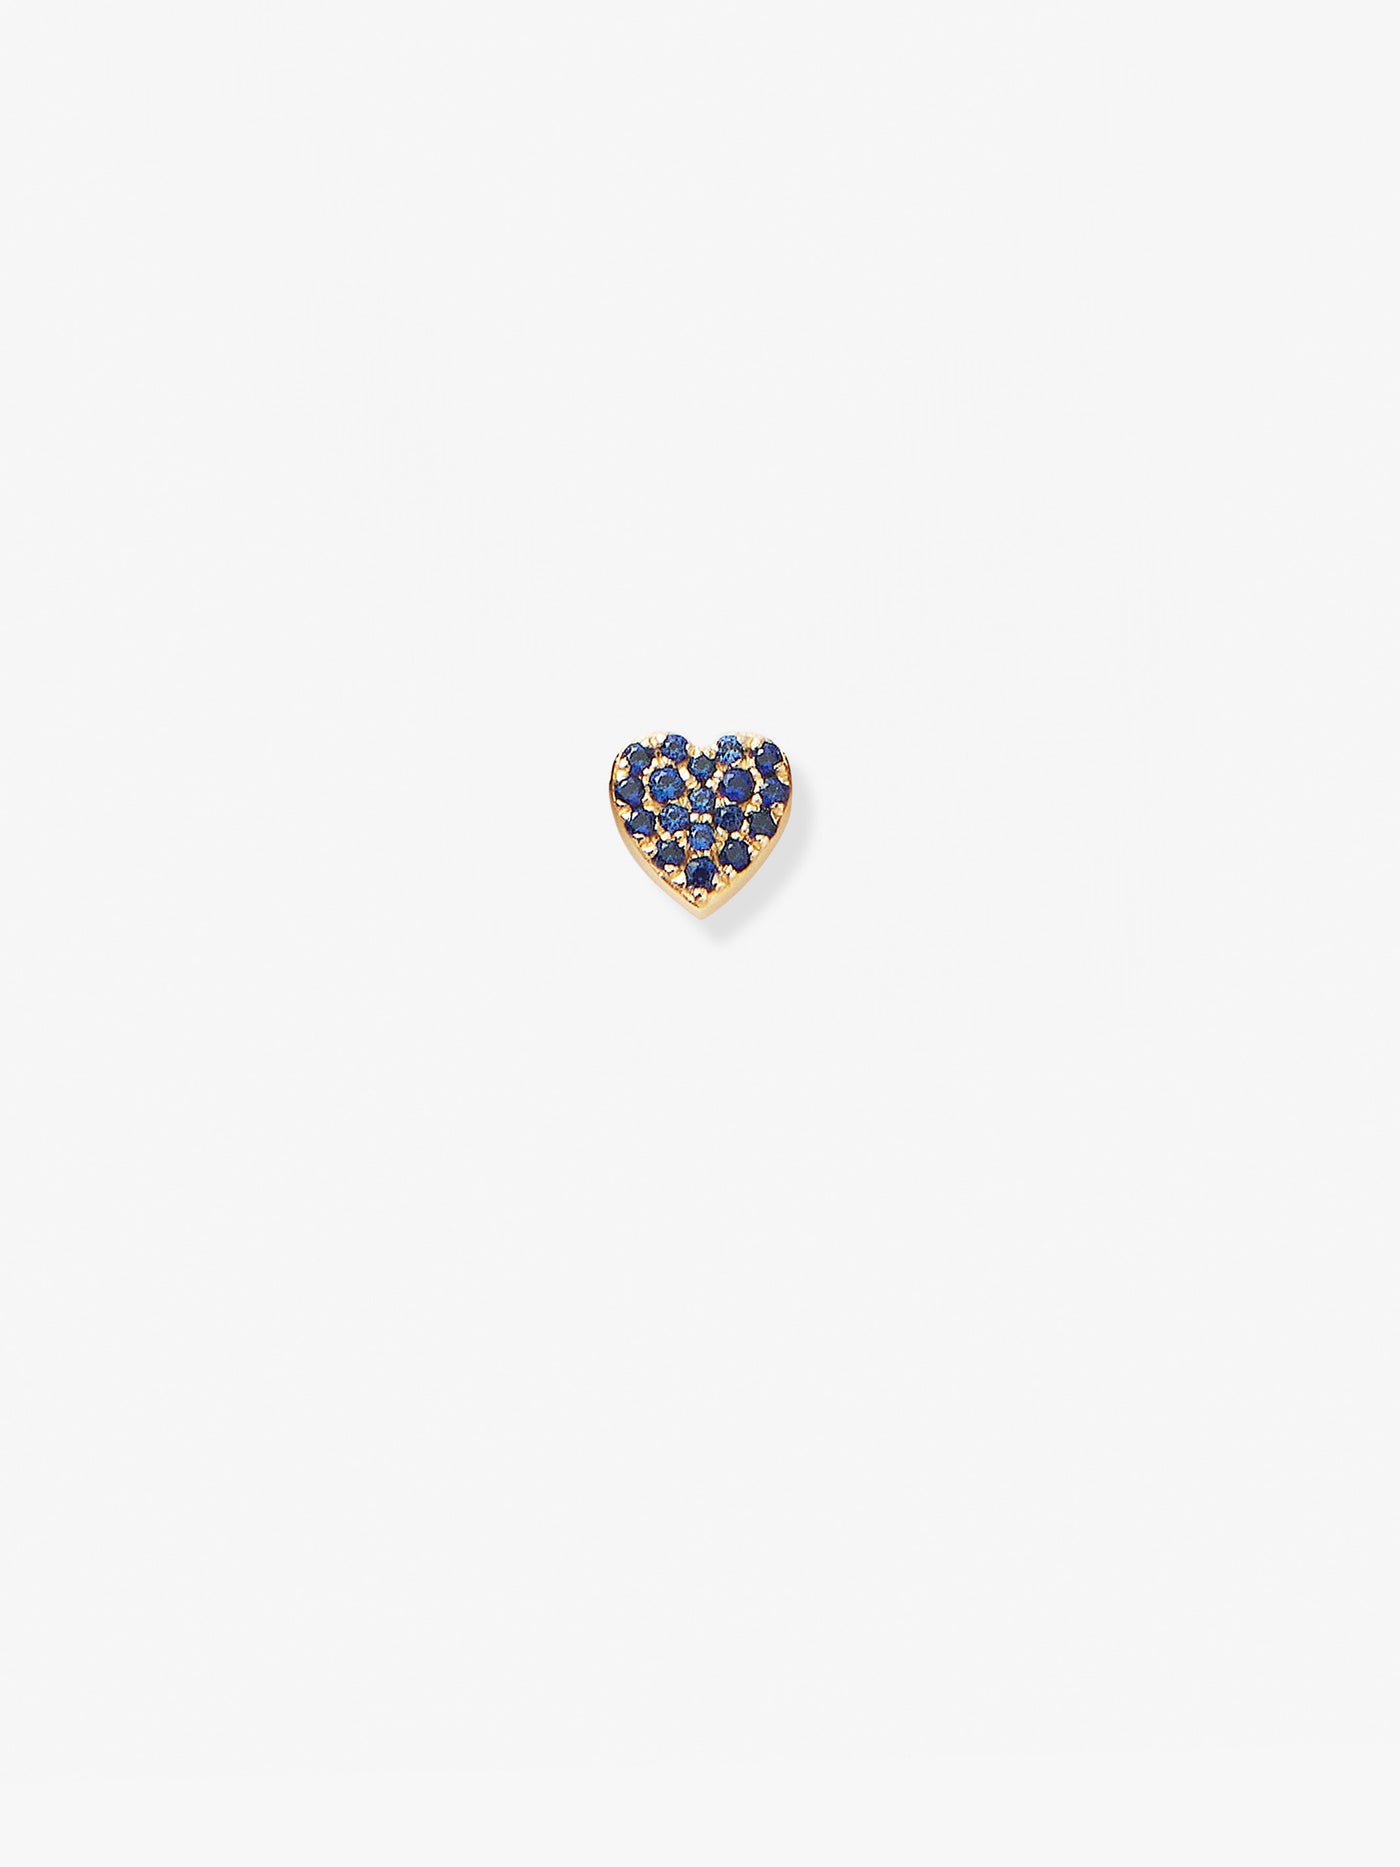 Heart in Blue Sapphire and 18k Gold